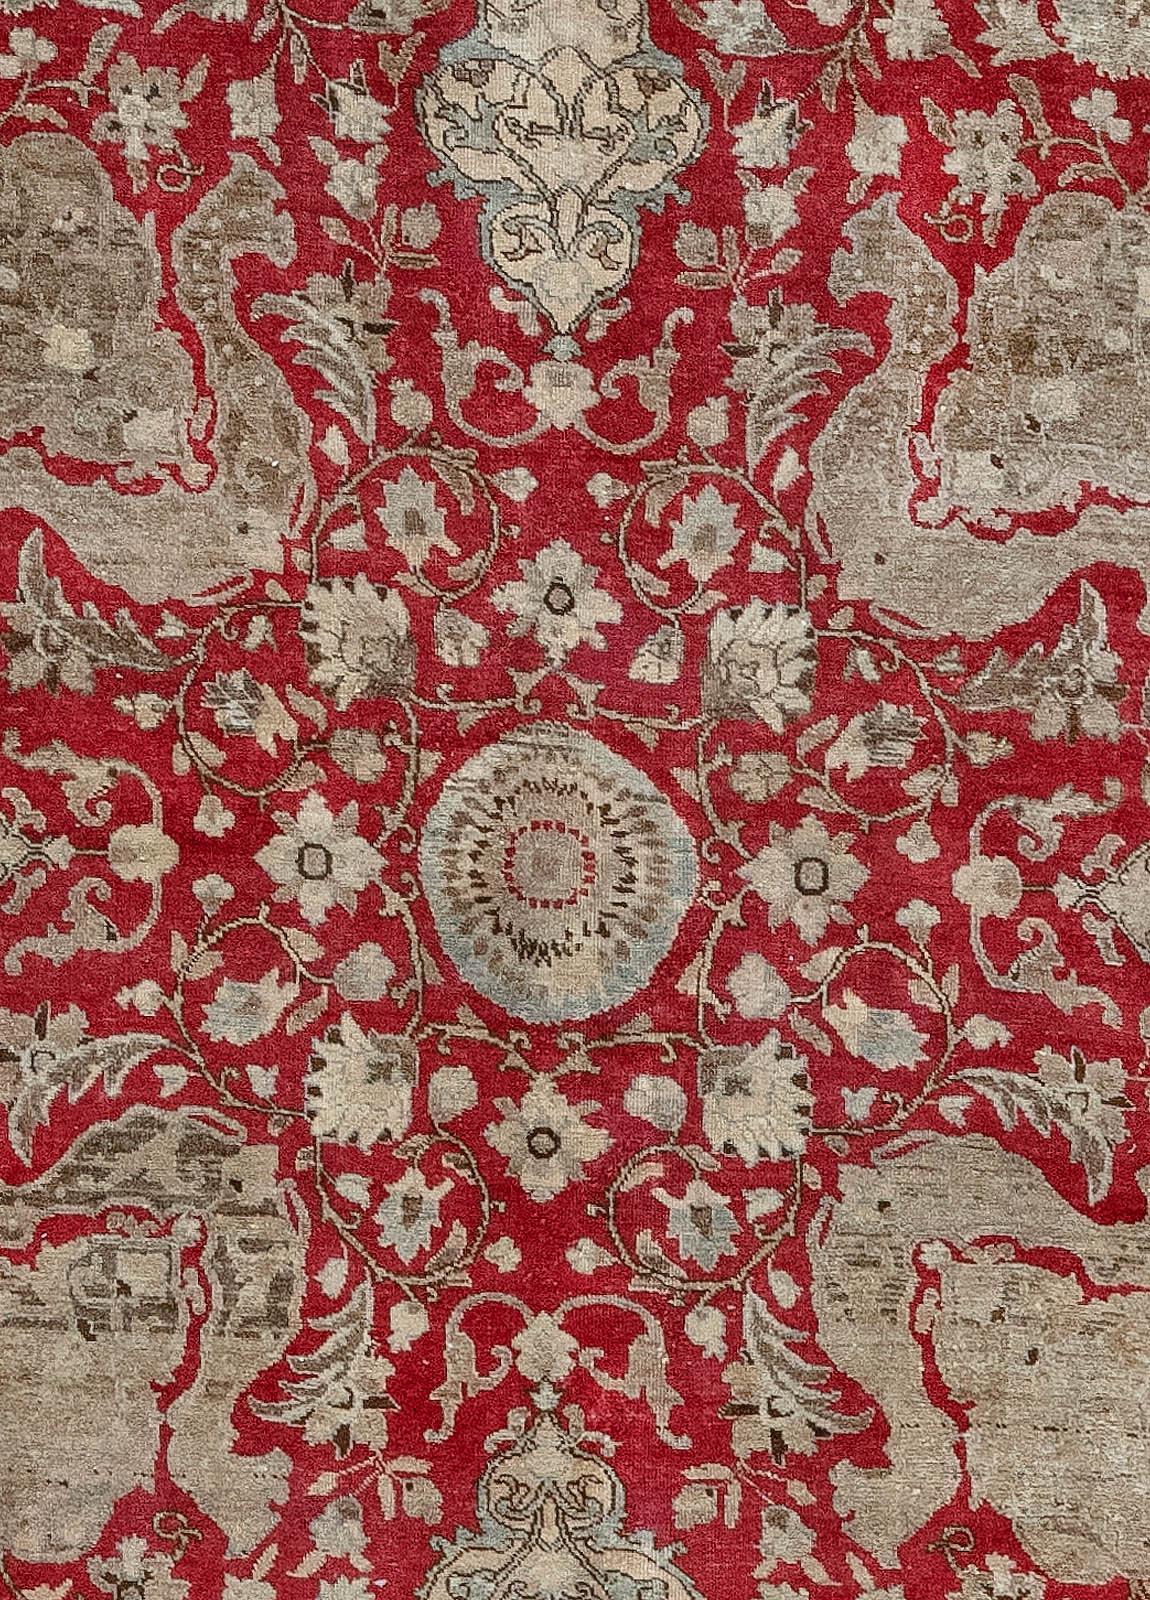 19th century Persian Tabriz red hand knotted wool carpet
Size: 10'8